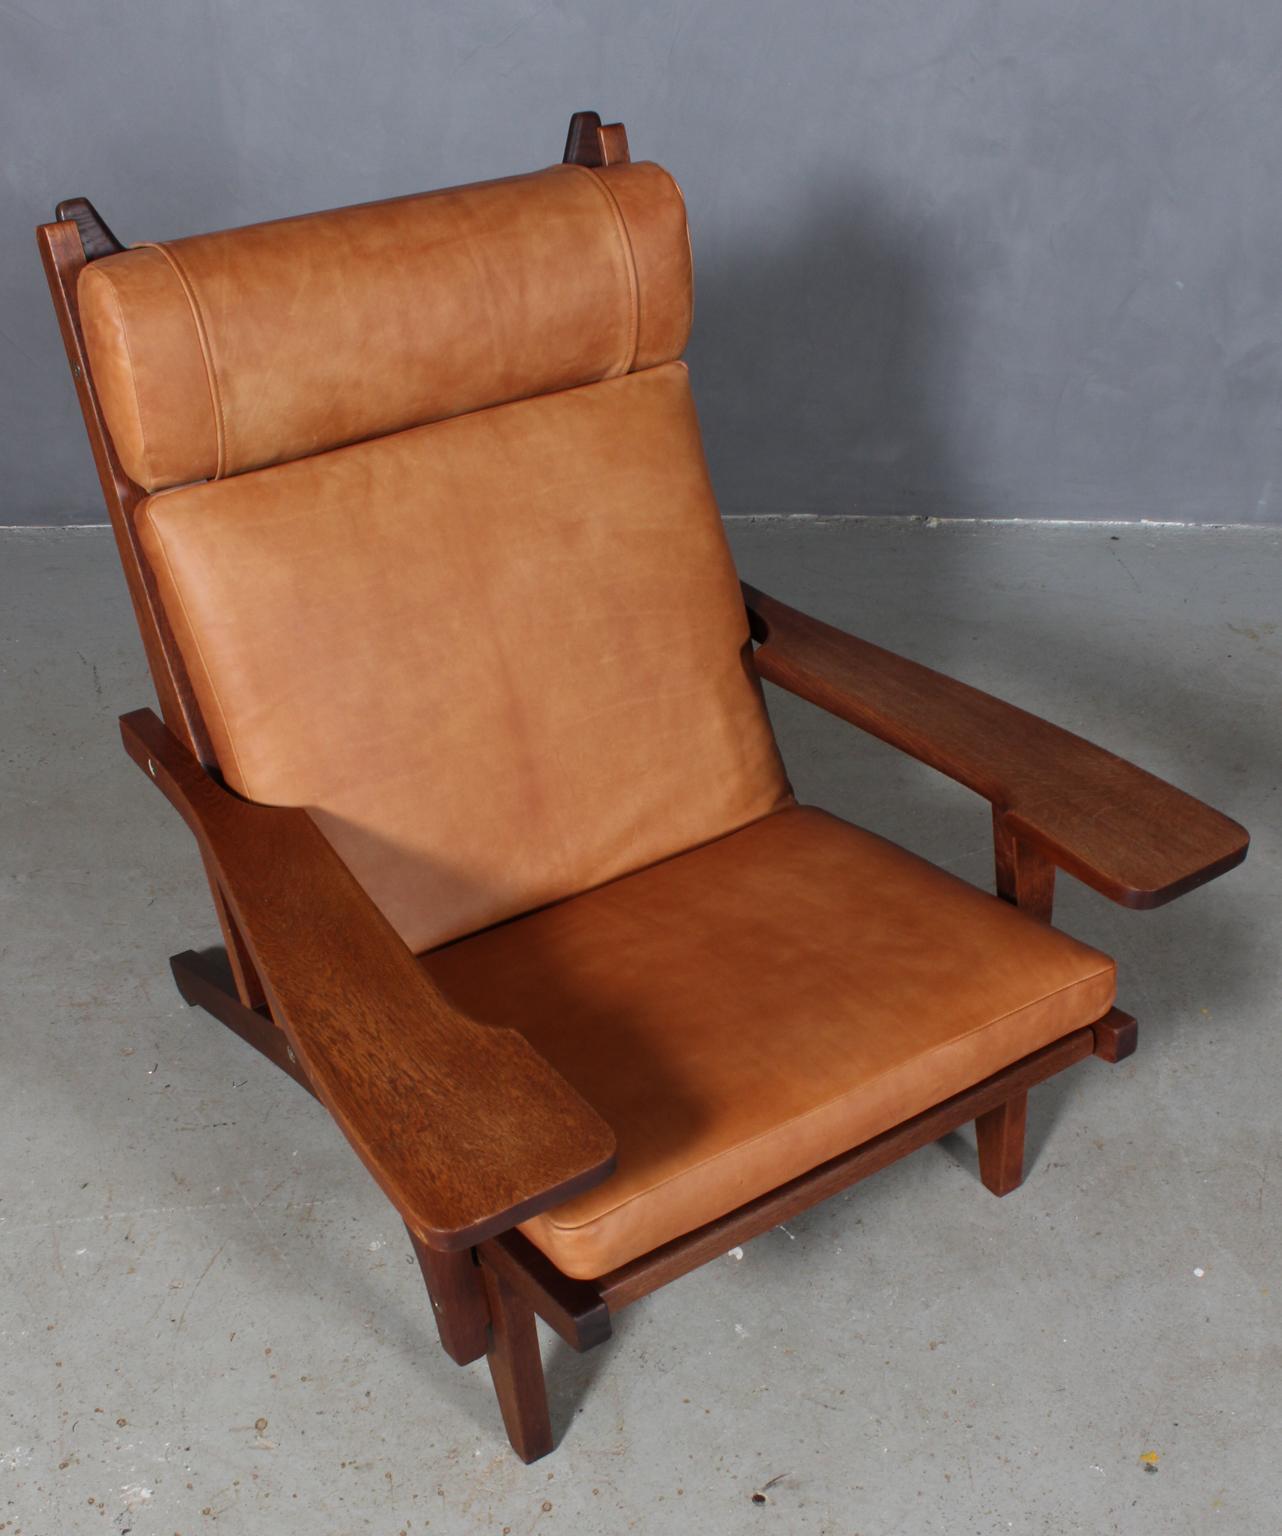 Hans J. Wegner lounge chair with loose cushions new upholstered with tan aniline leather.

Frame of smoked oak. With armrests.

Model GE-375, made by GETAMA.